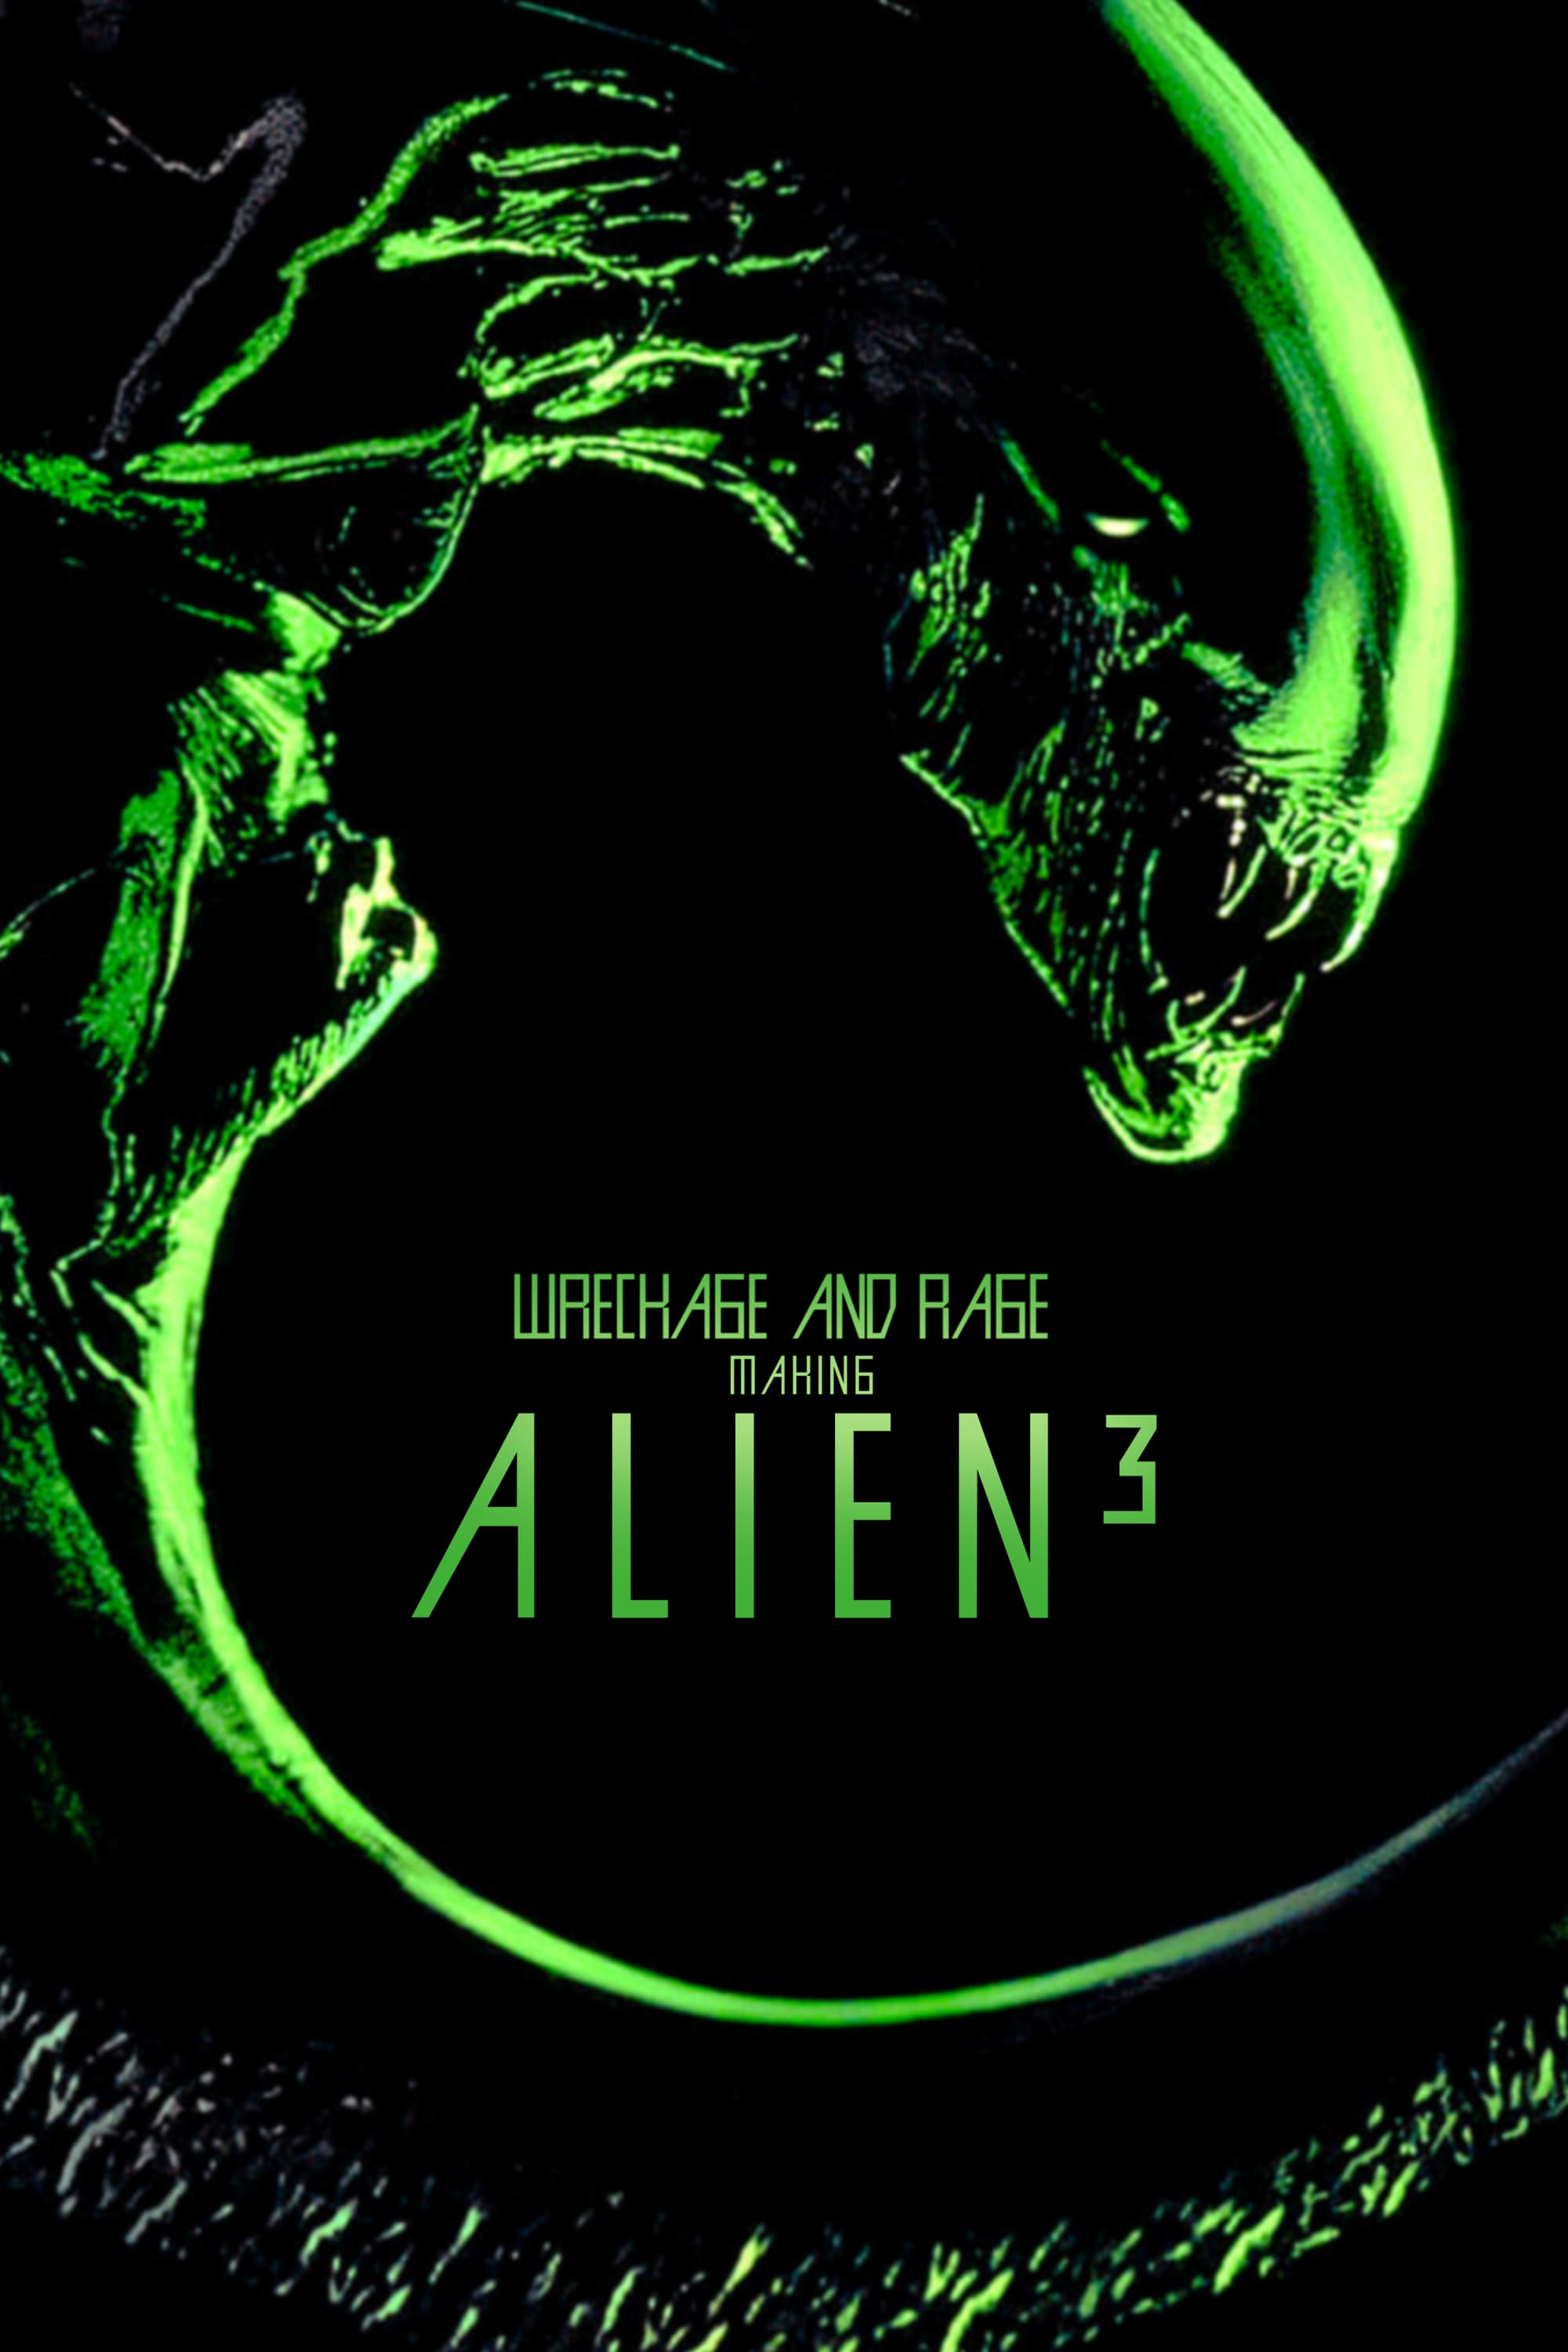 Wreckage and Rage : Making 'Alien³'